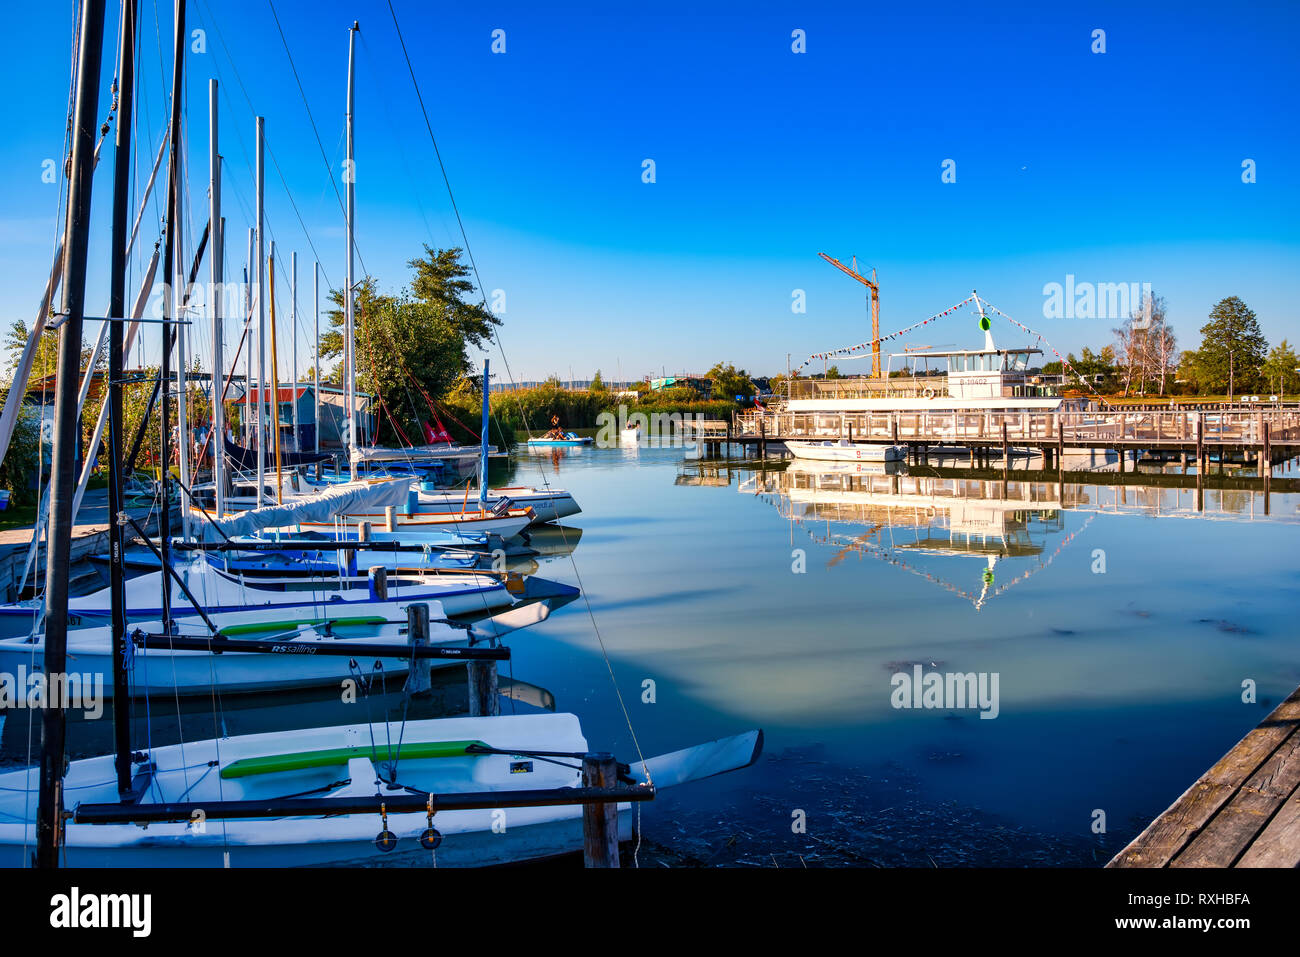 Austria, Neusiedl, 09/12/2018: Small harbour at Lake Neusiedl in Austria with Boats and sailing ships. Stock Photo